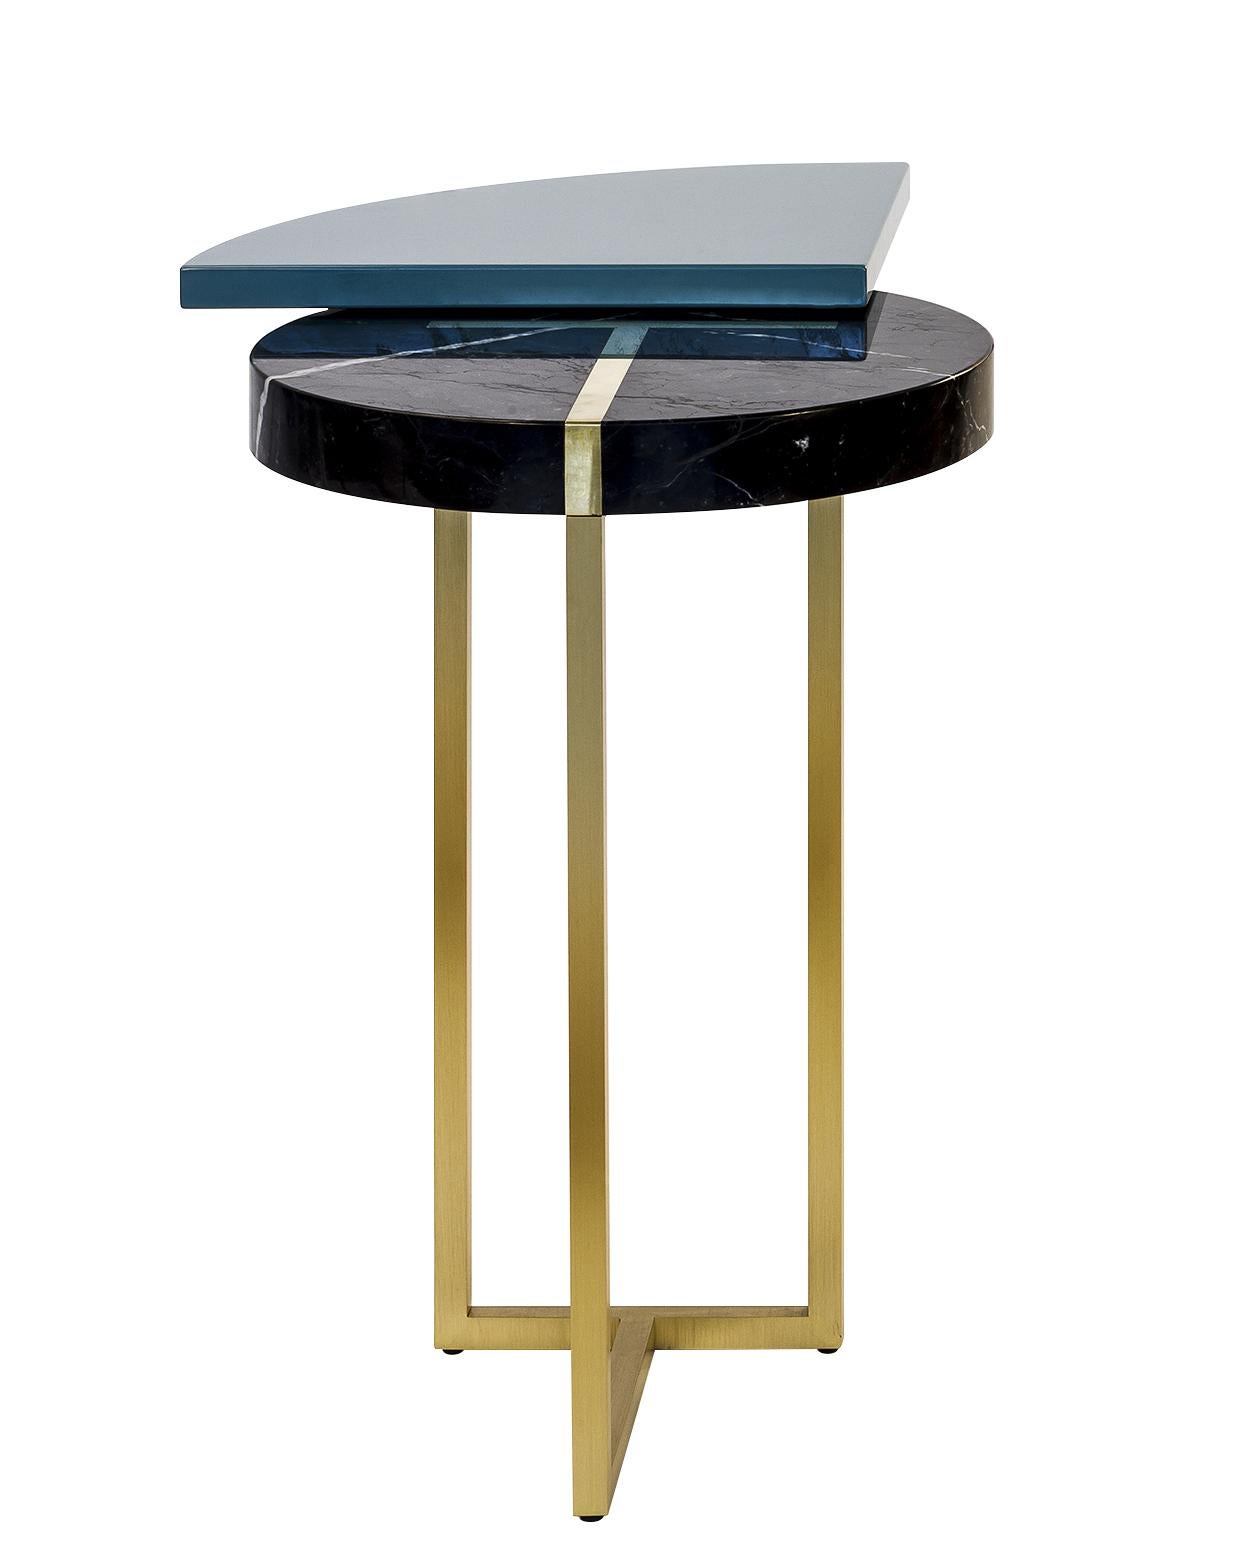 Wings end table by Hagit Pincovici
Dimensions: 54 L x 36 W x 48 H
Materials: Lacquered wood, Marquina marble, Brass

Hagit Pincovici founded her eponymous bespoke luxury furniture and lighting atelier in 2014. Known in her earlier work for a